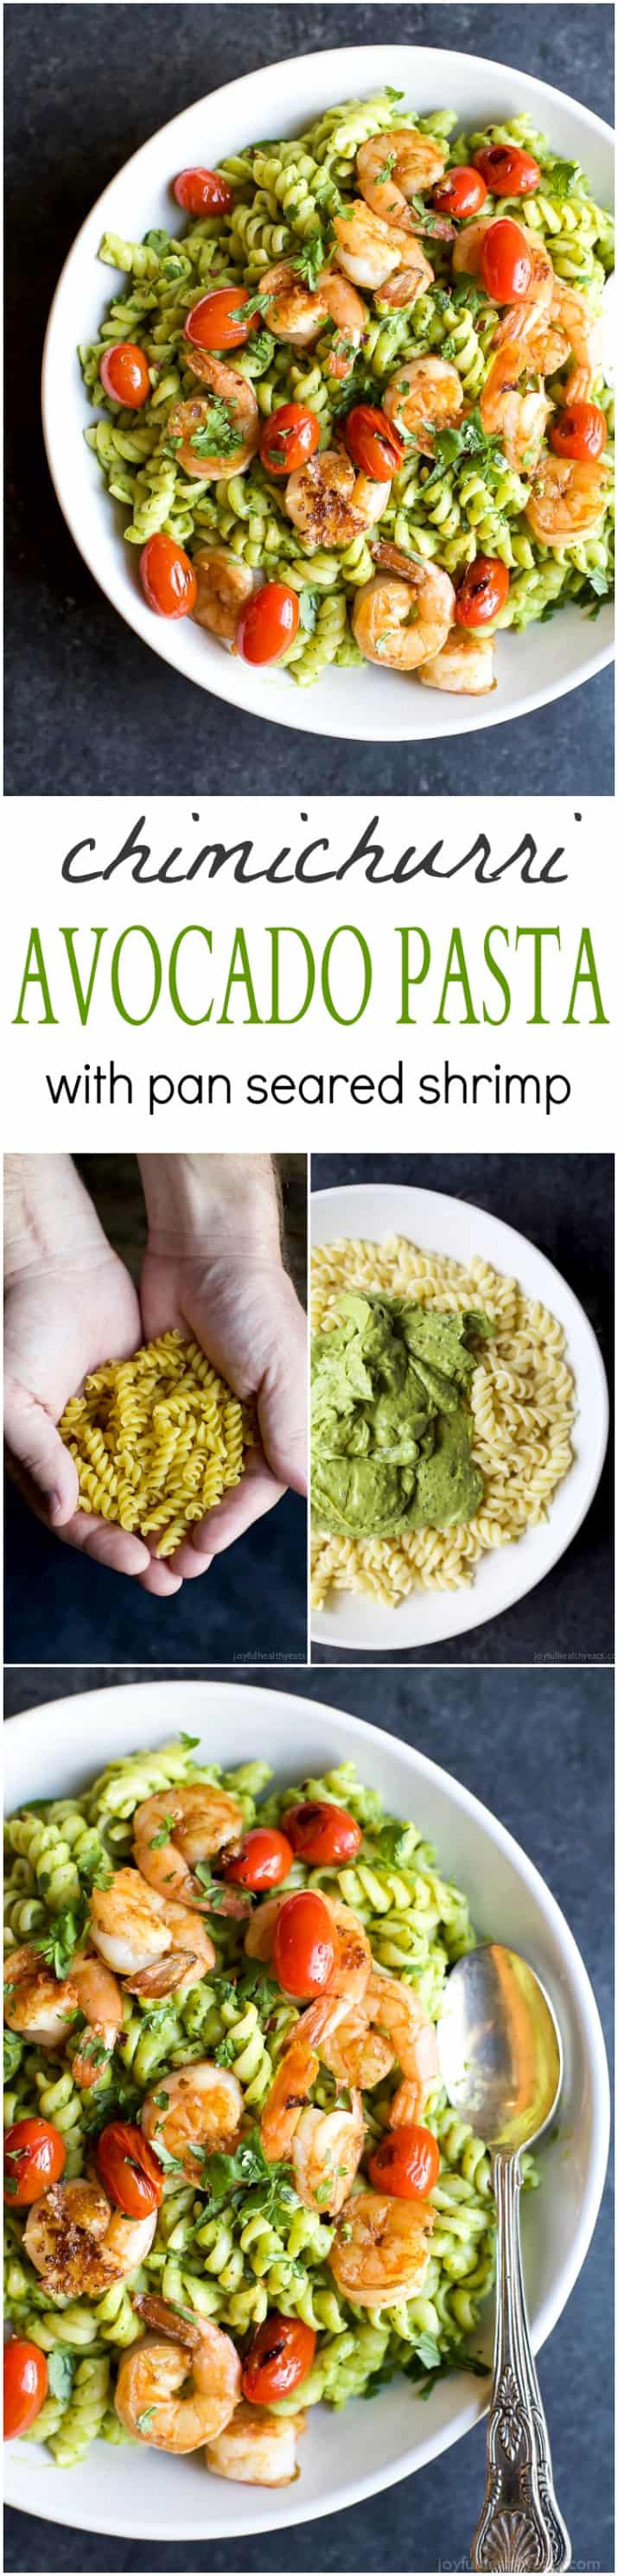 Pinterest collage for Chimichurri Avocado Pasta with Pan Seared Shrimp recipe